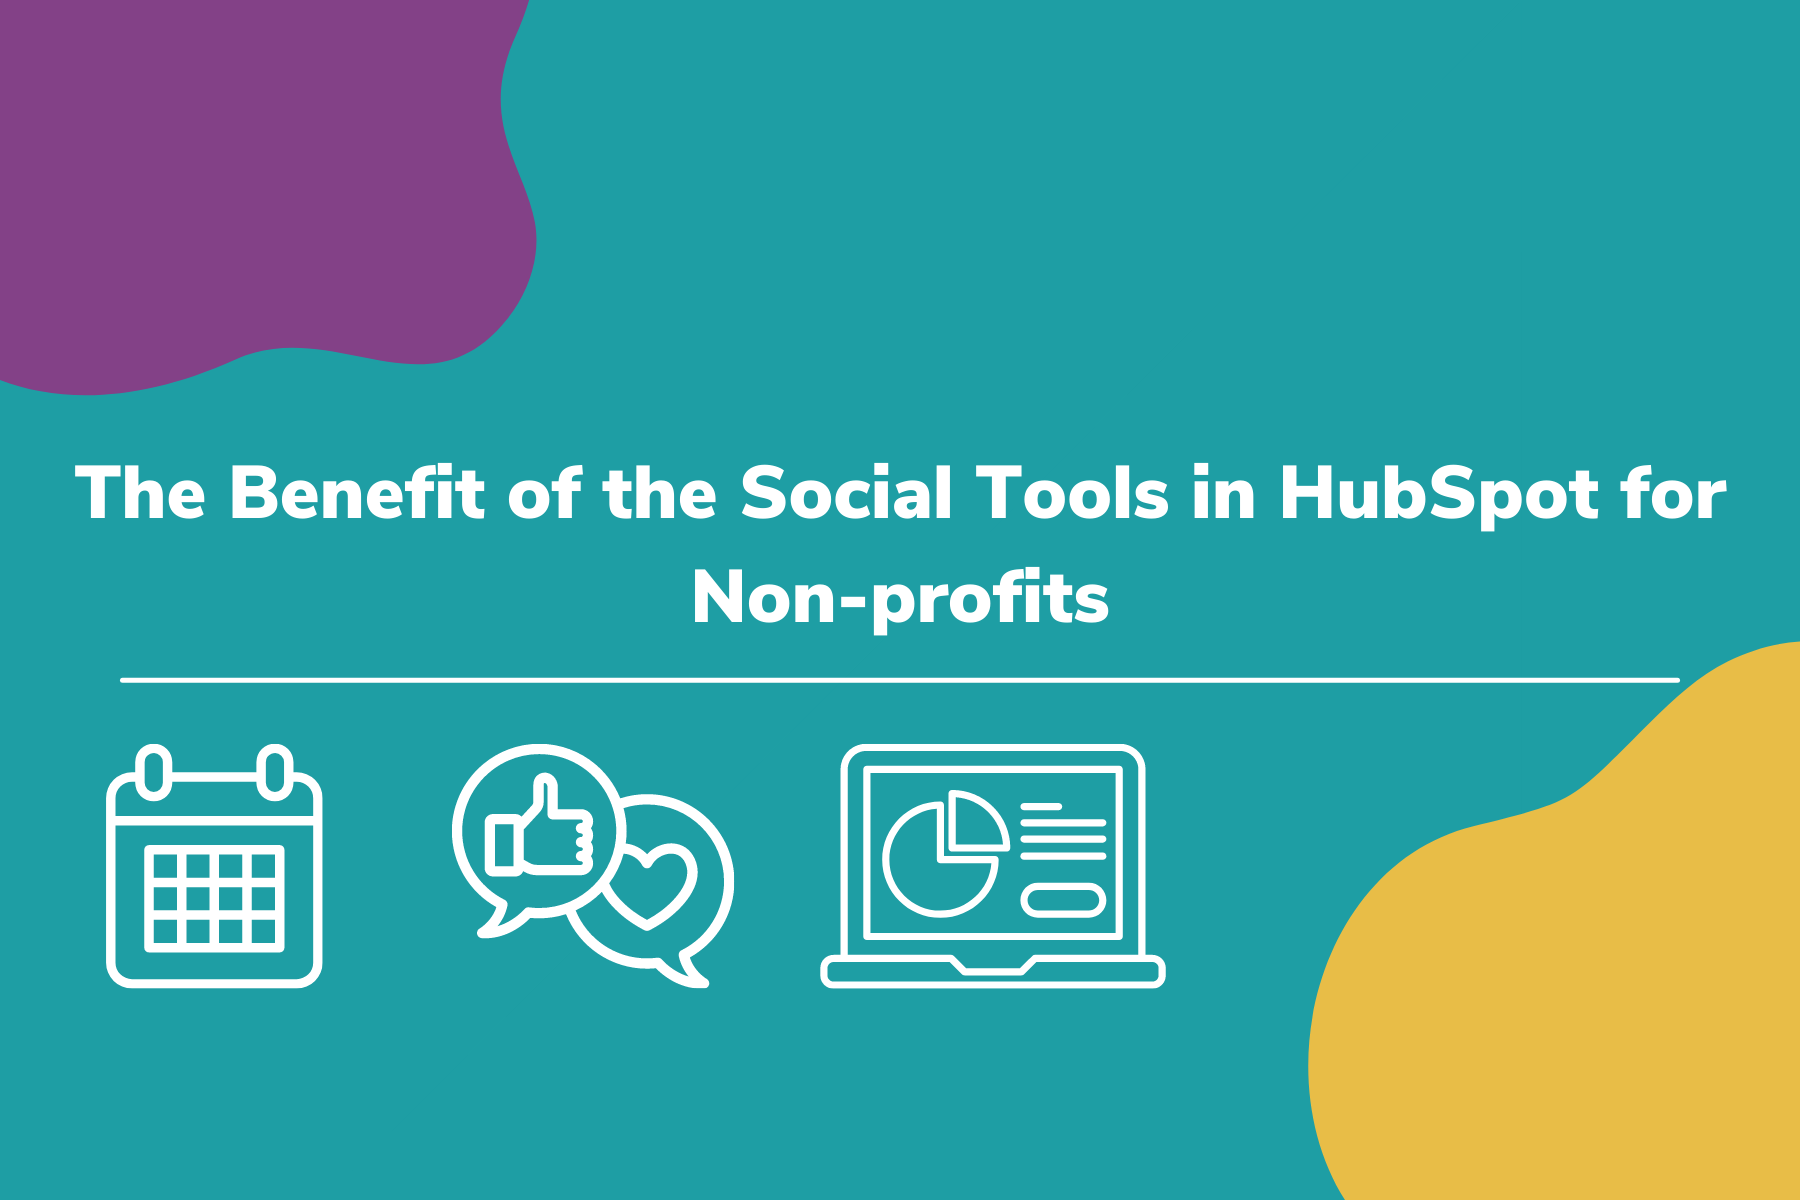 The benefit of the social tools in HubSpot for non-profits